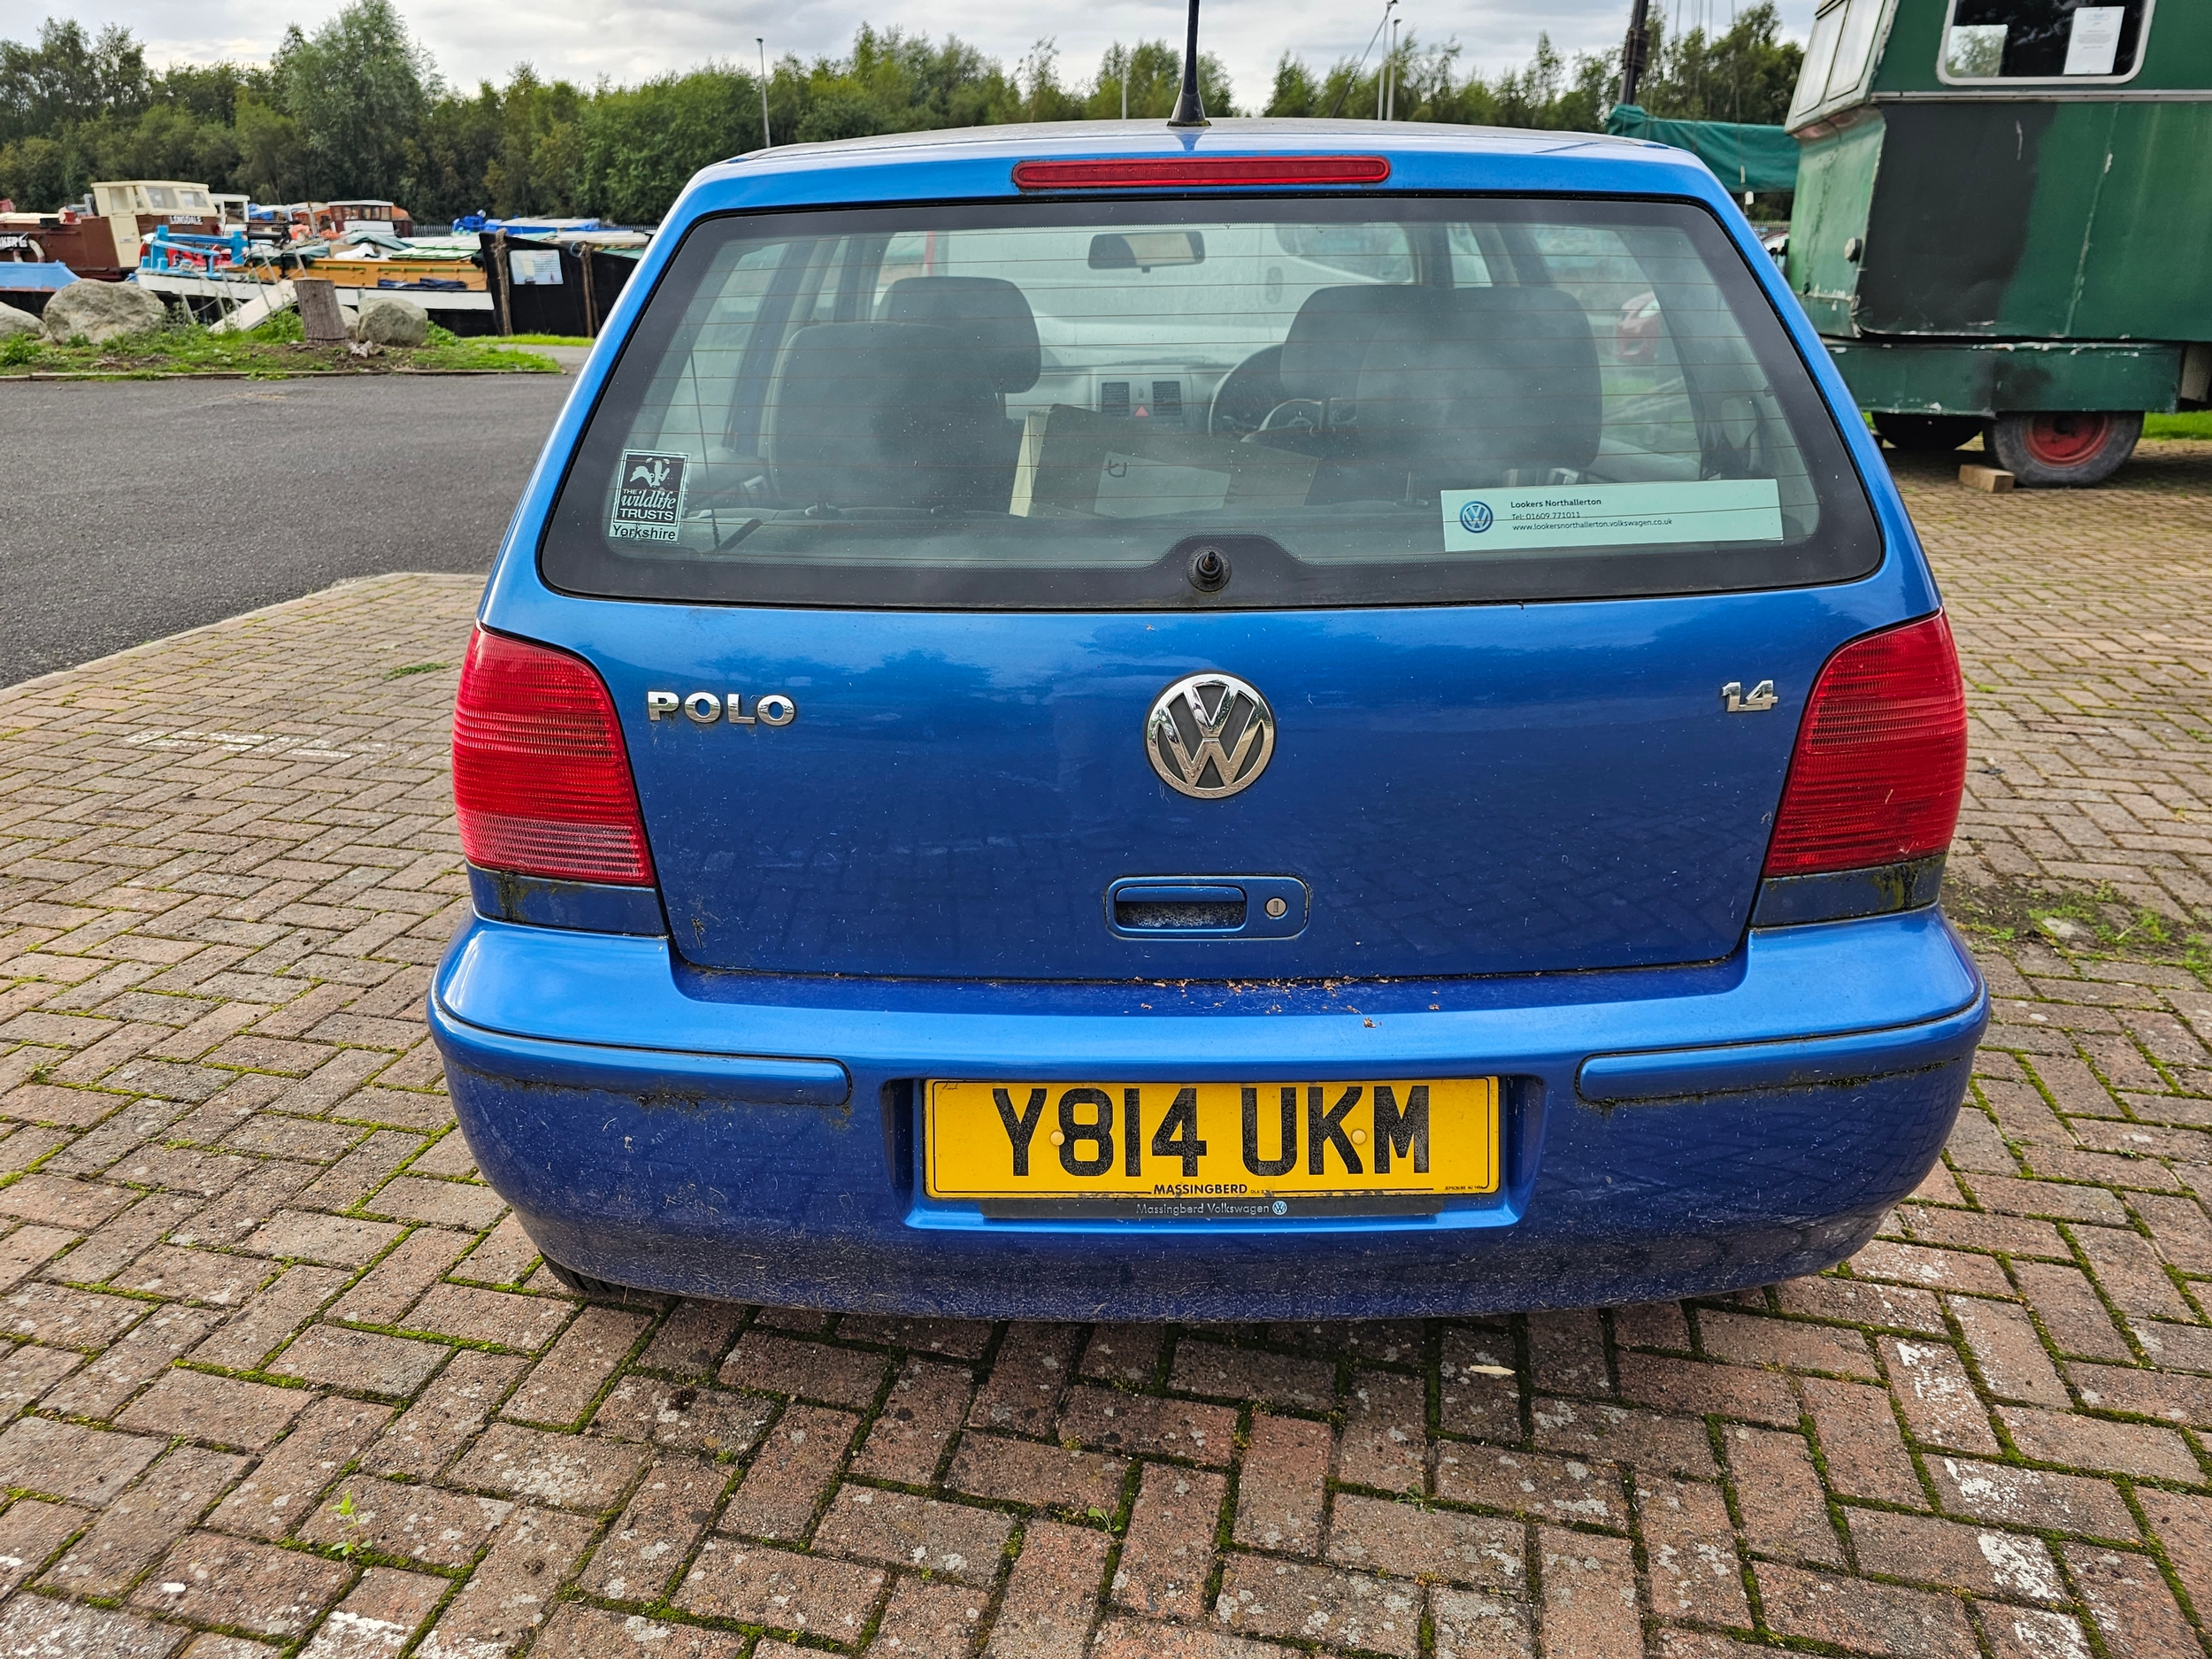 2001 VW POLO, 1390cc. Registration number Y814UKM. VIN number WVWZZZ6NZ1Y259513. Property of a - Image 8 of 11